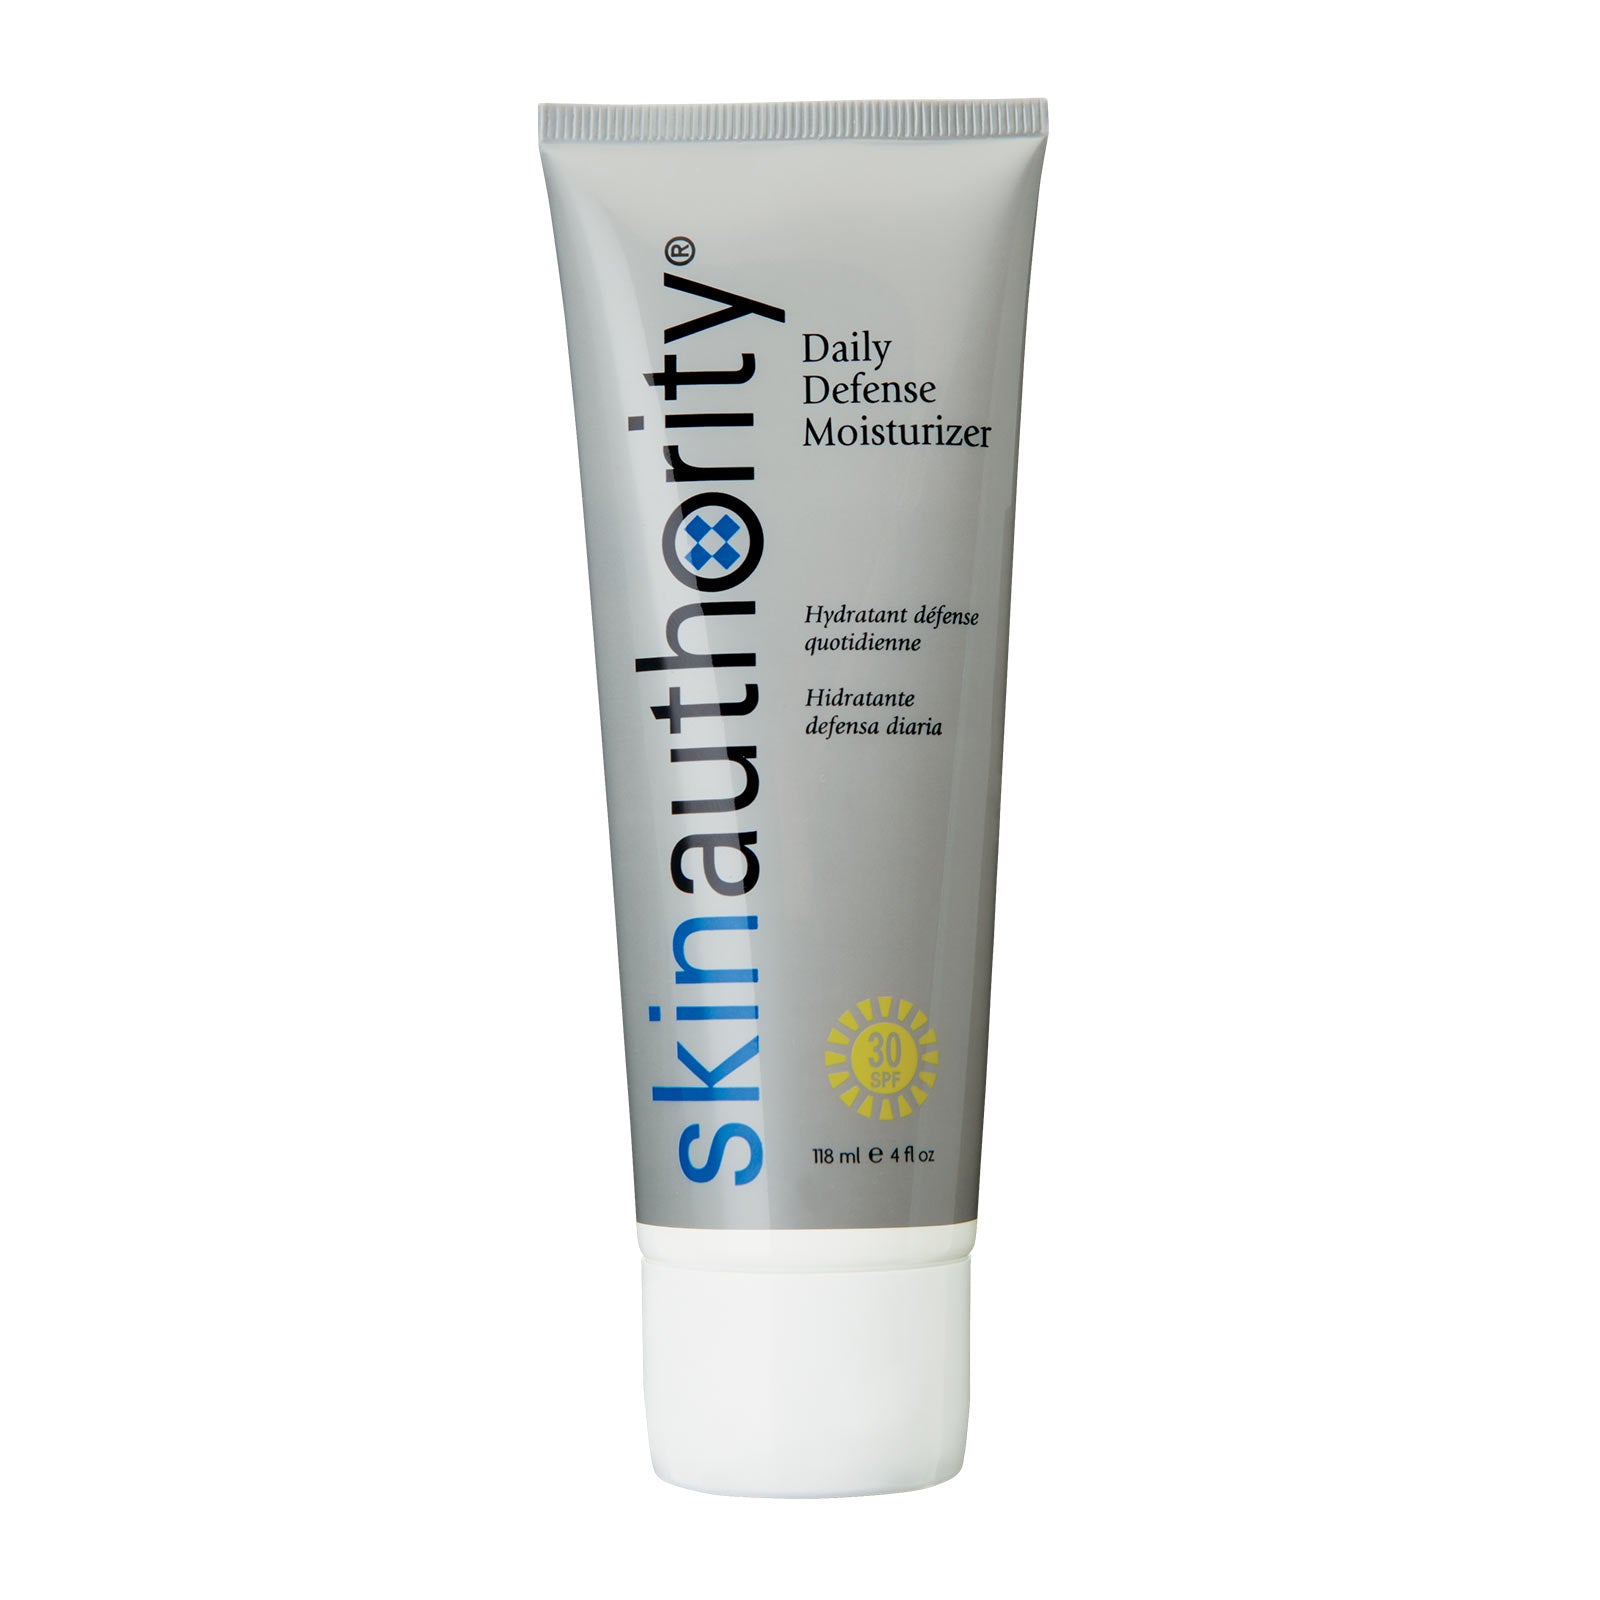 Daily Defense Moisturizer SPF 30 from Skin Authority